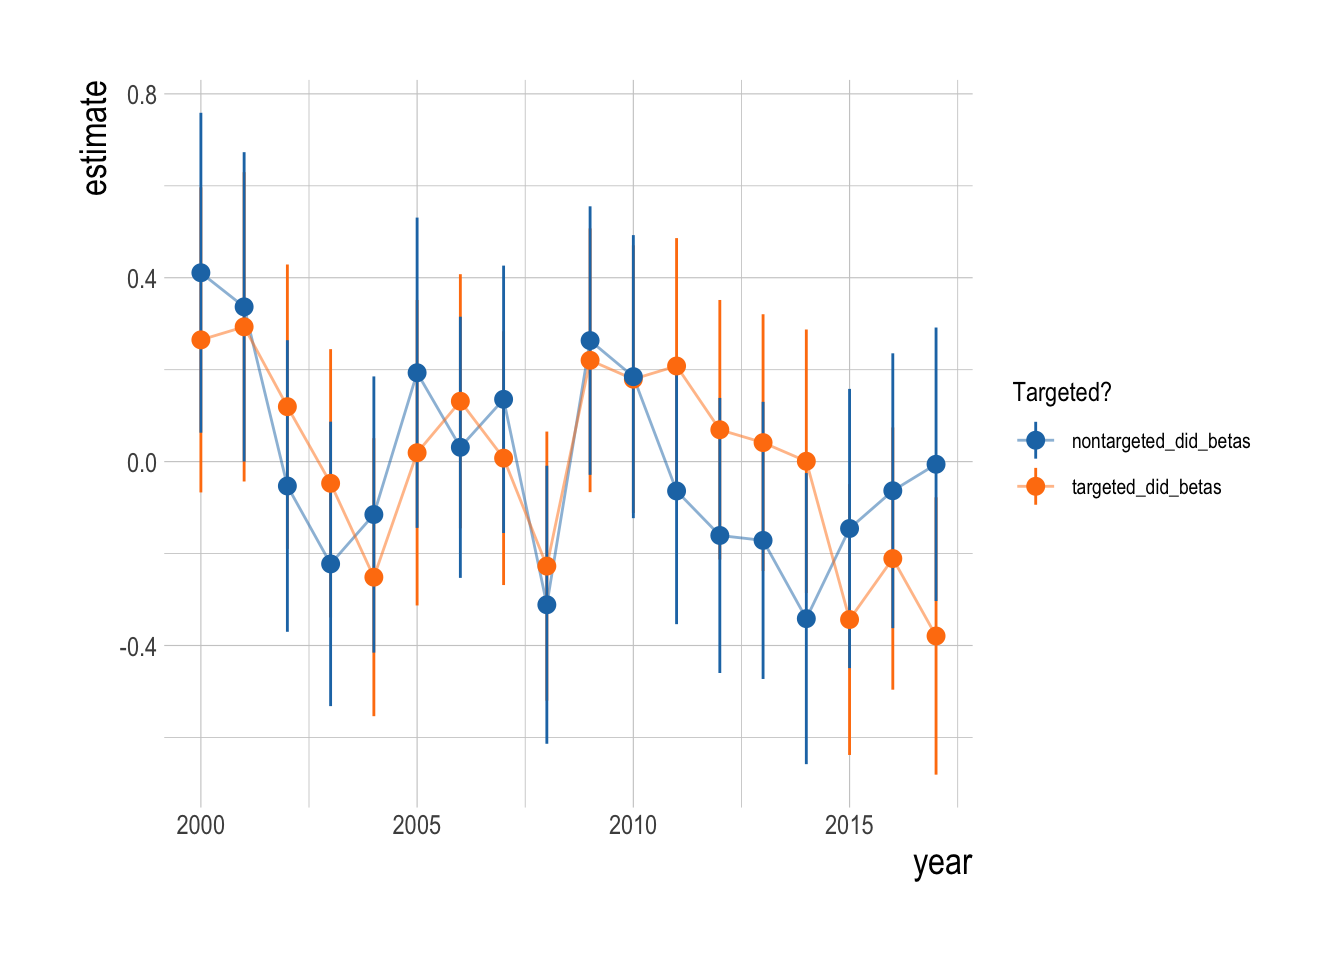 Trends in standardized mean abundance of targeted and non-targeted species